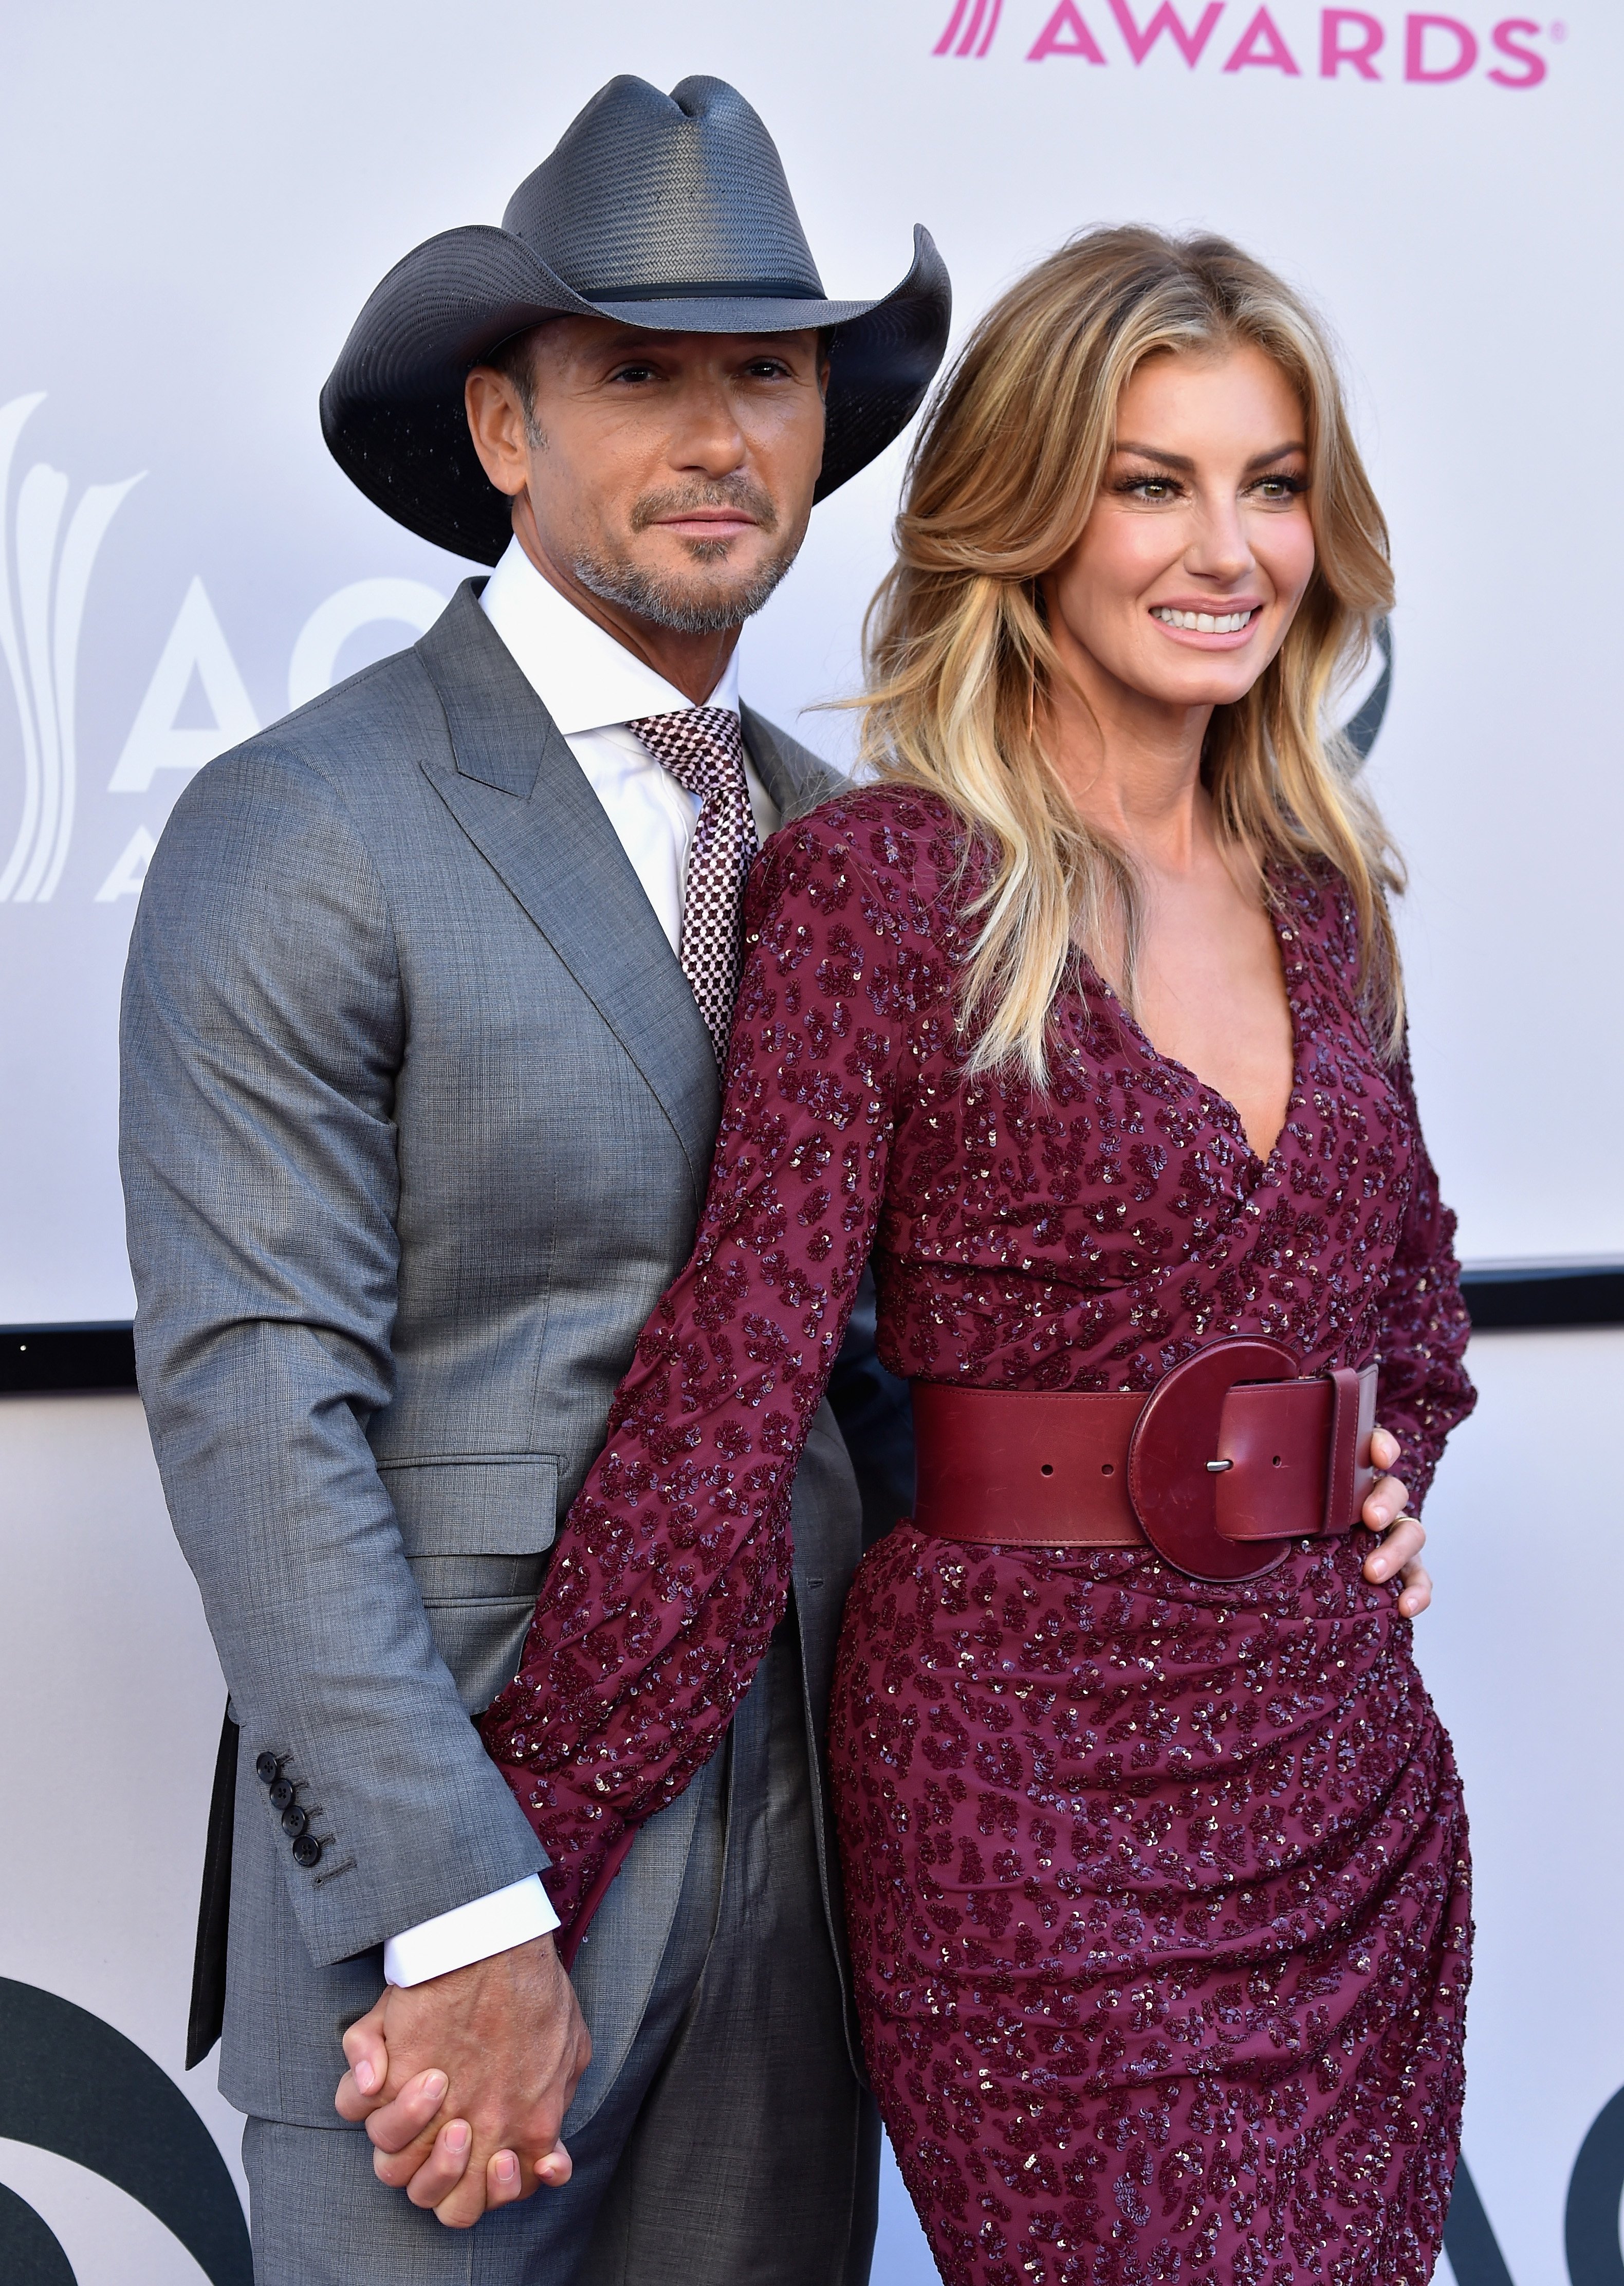 Tim McGraw and Faith Hill attend the 52nd Academy Of Country Music Awards at on April 2, 2017, in Las Vegas, Nevada. | Source: Getty Images.